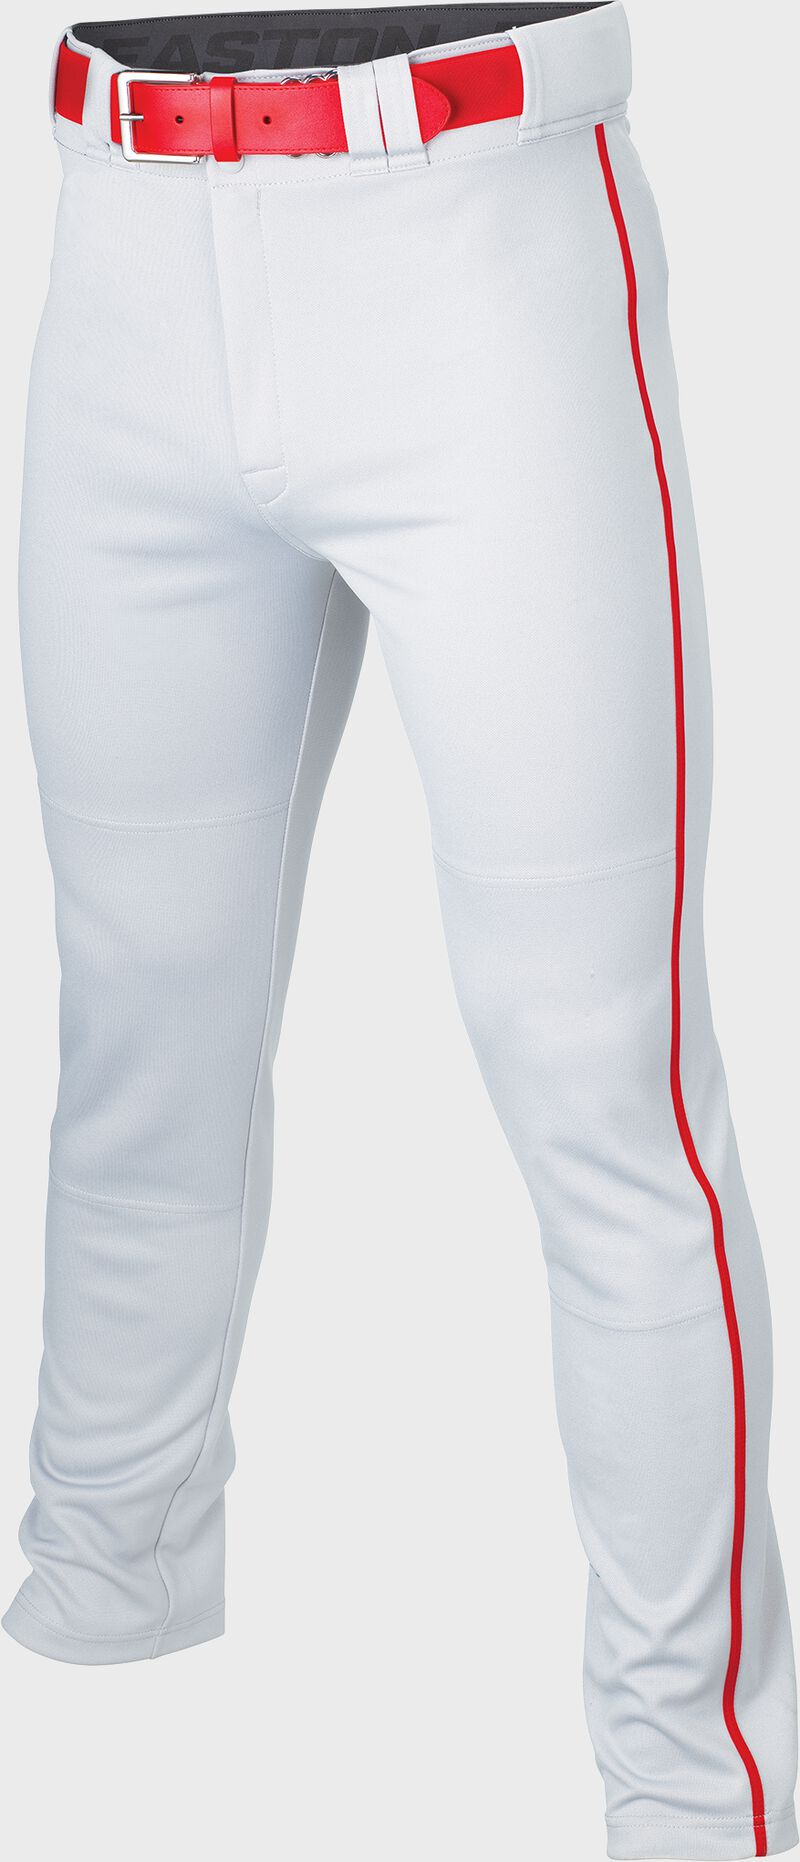 Rival+ Pant Youth Piped WHITE/RED L image number null